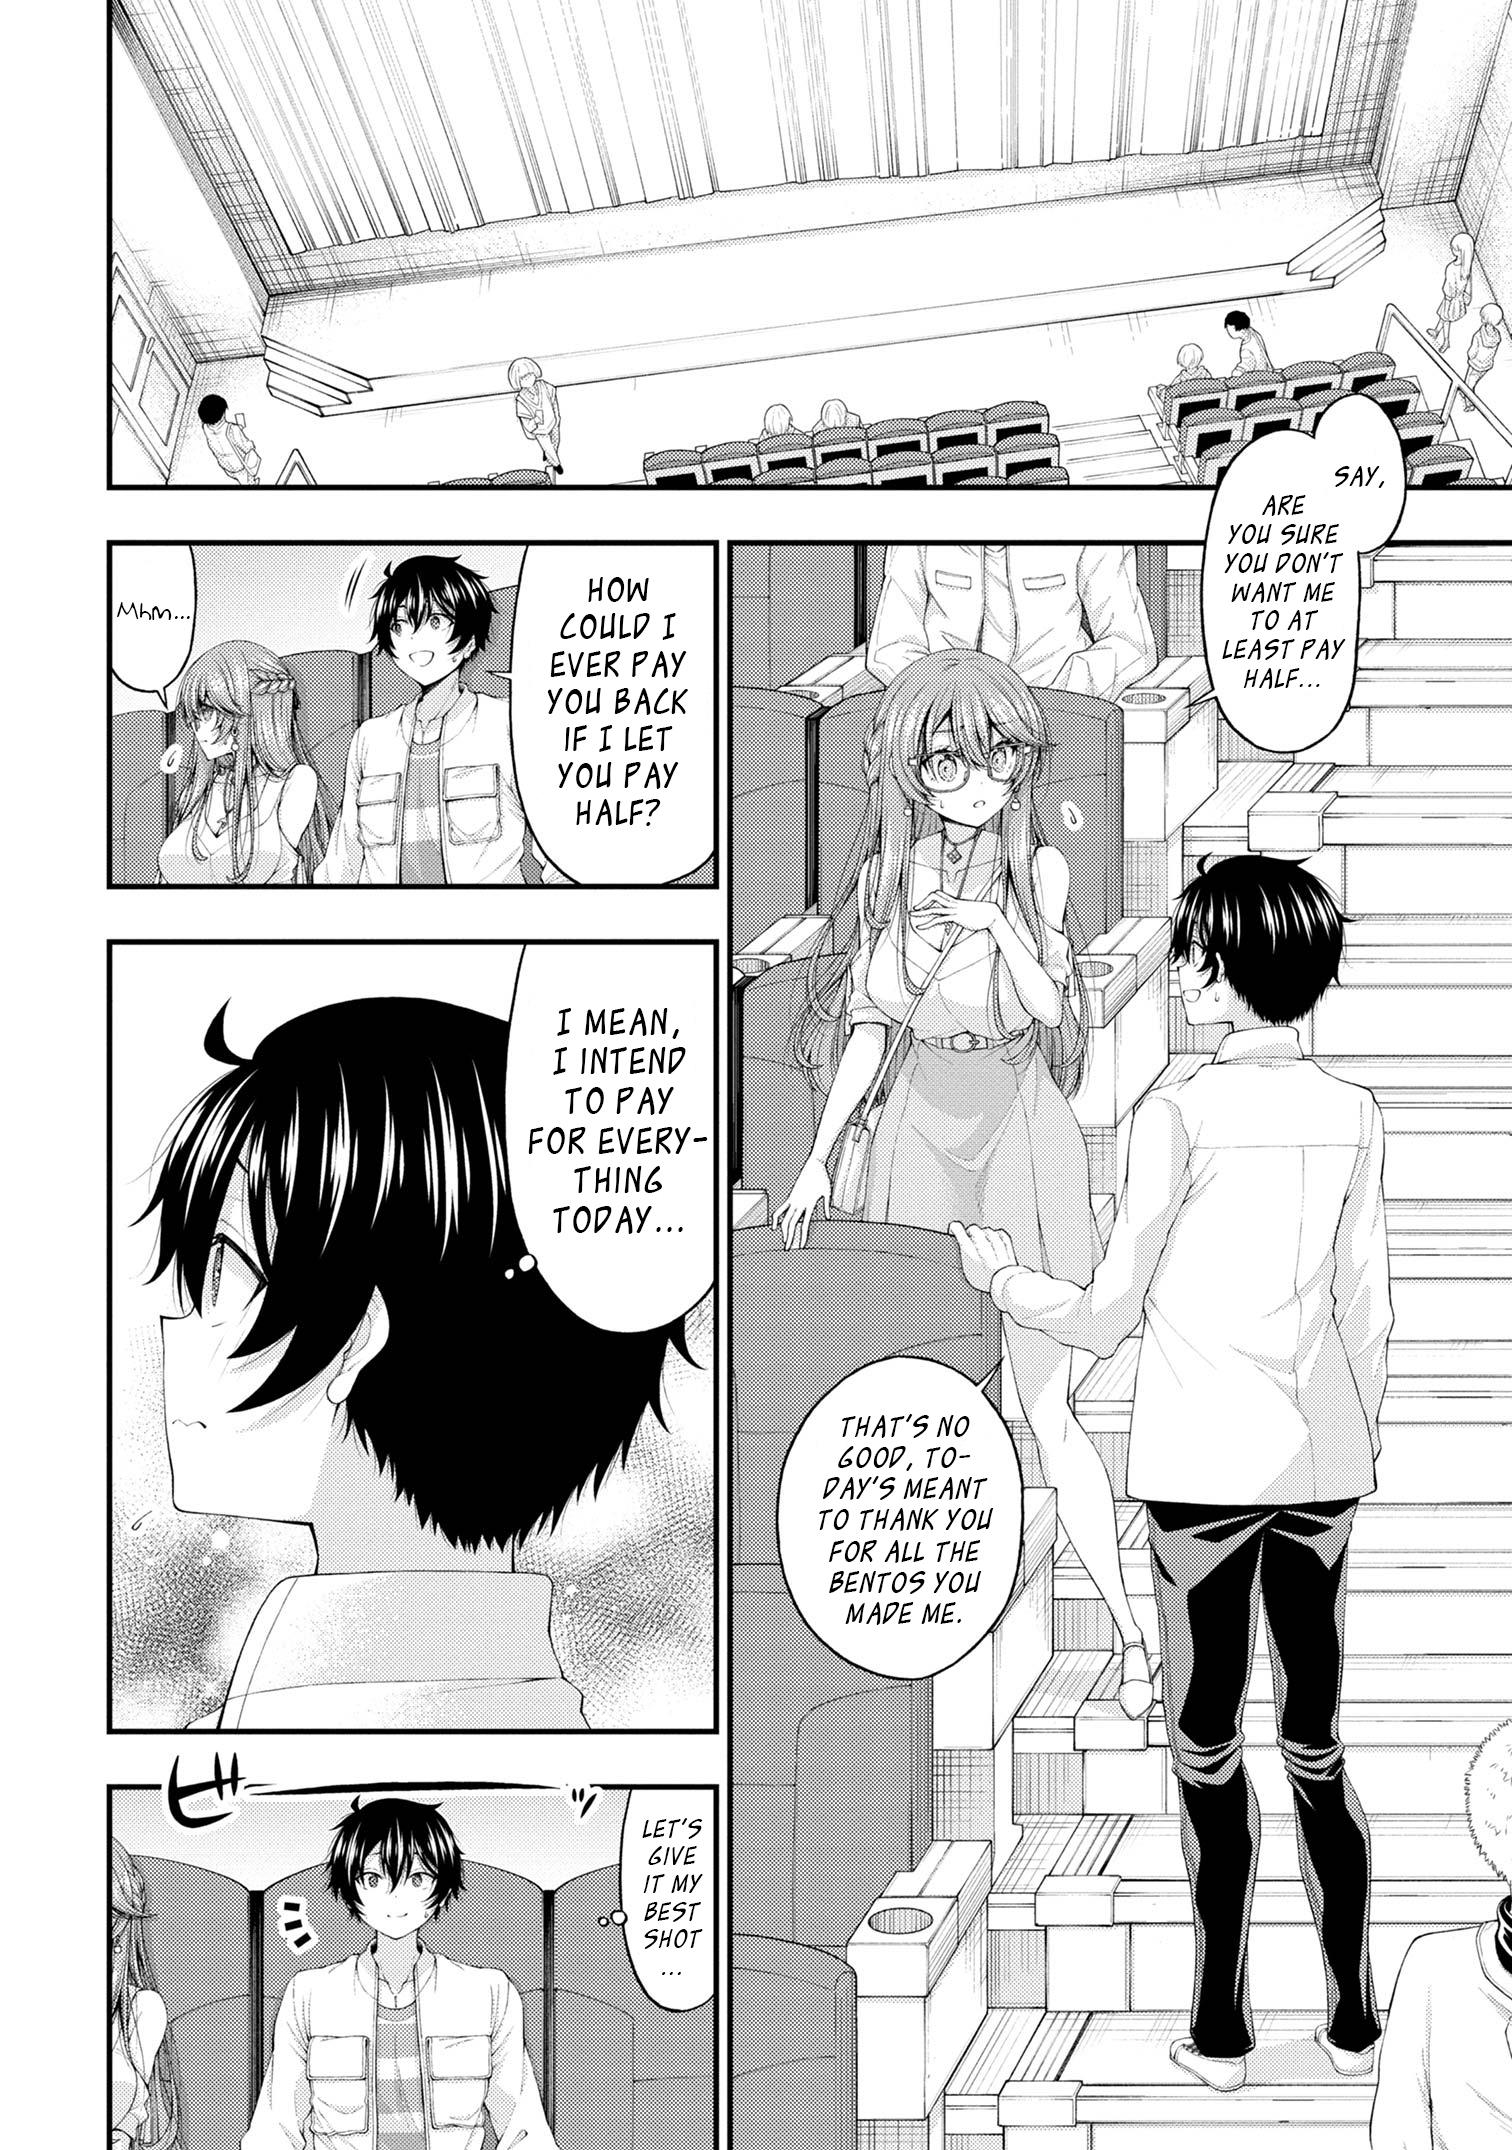 The Gal Who Was Meant To Confess To Me As A Game Punishment Has Apparently Fallen In Love With Me Chapter 10 #10